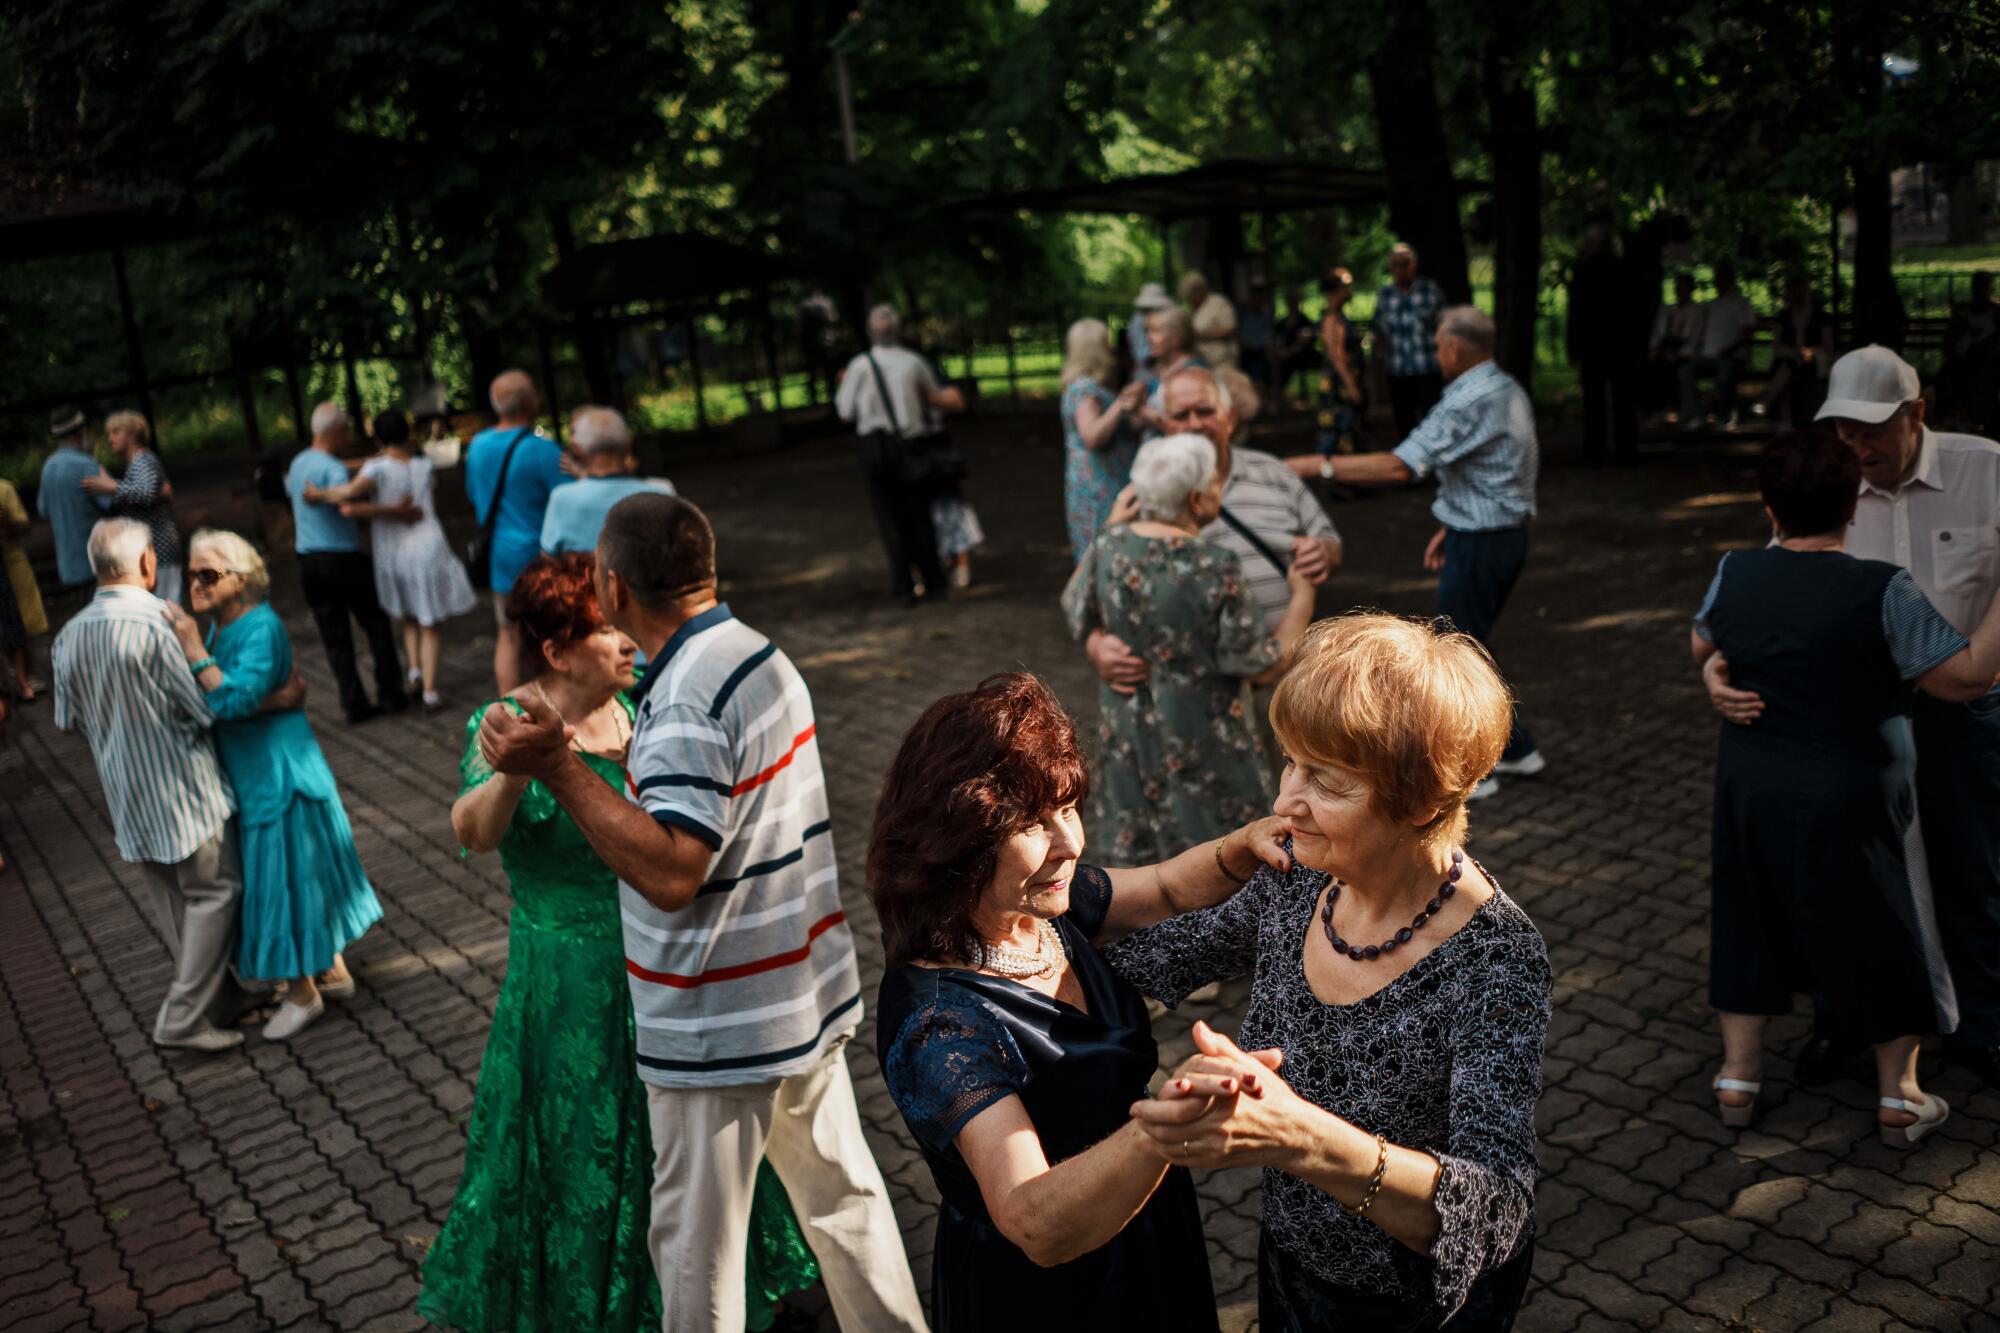 Couples dance in a park with trees in the background 